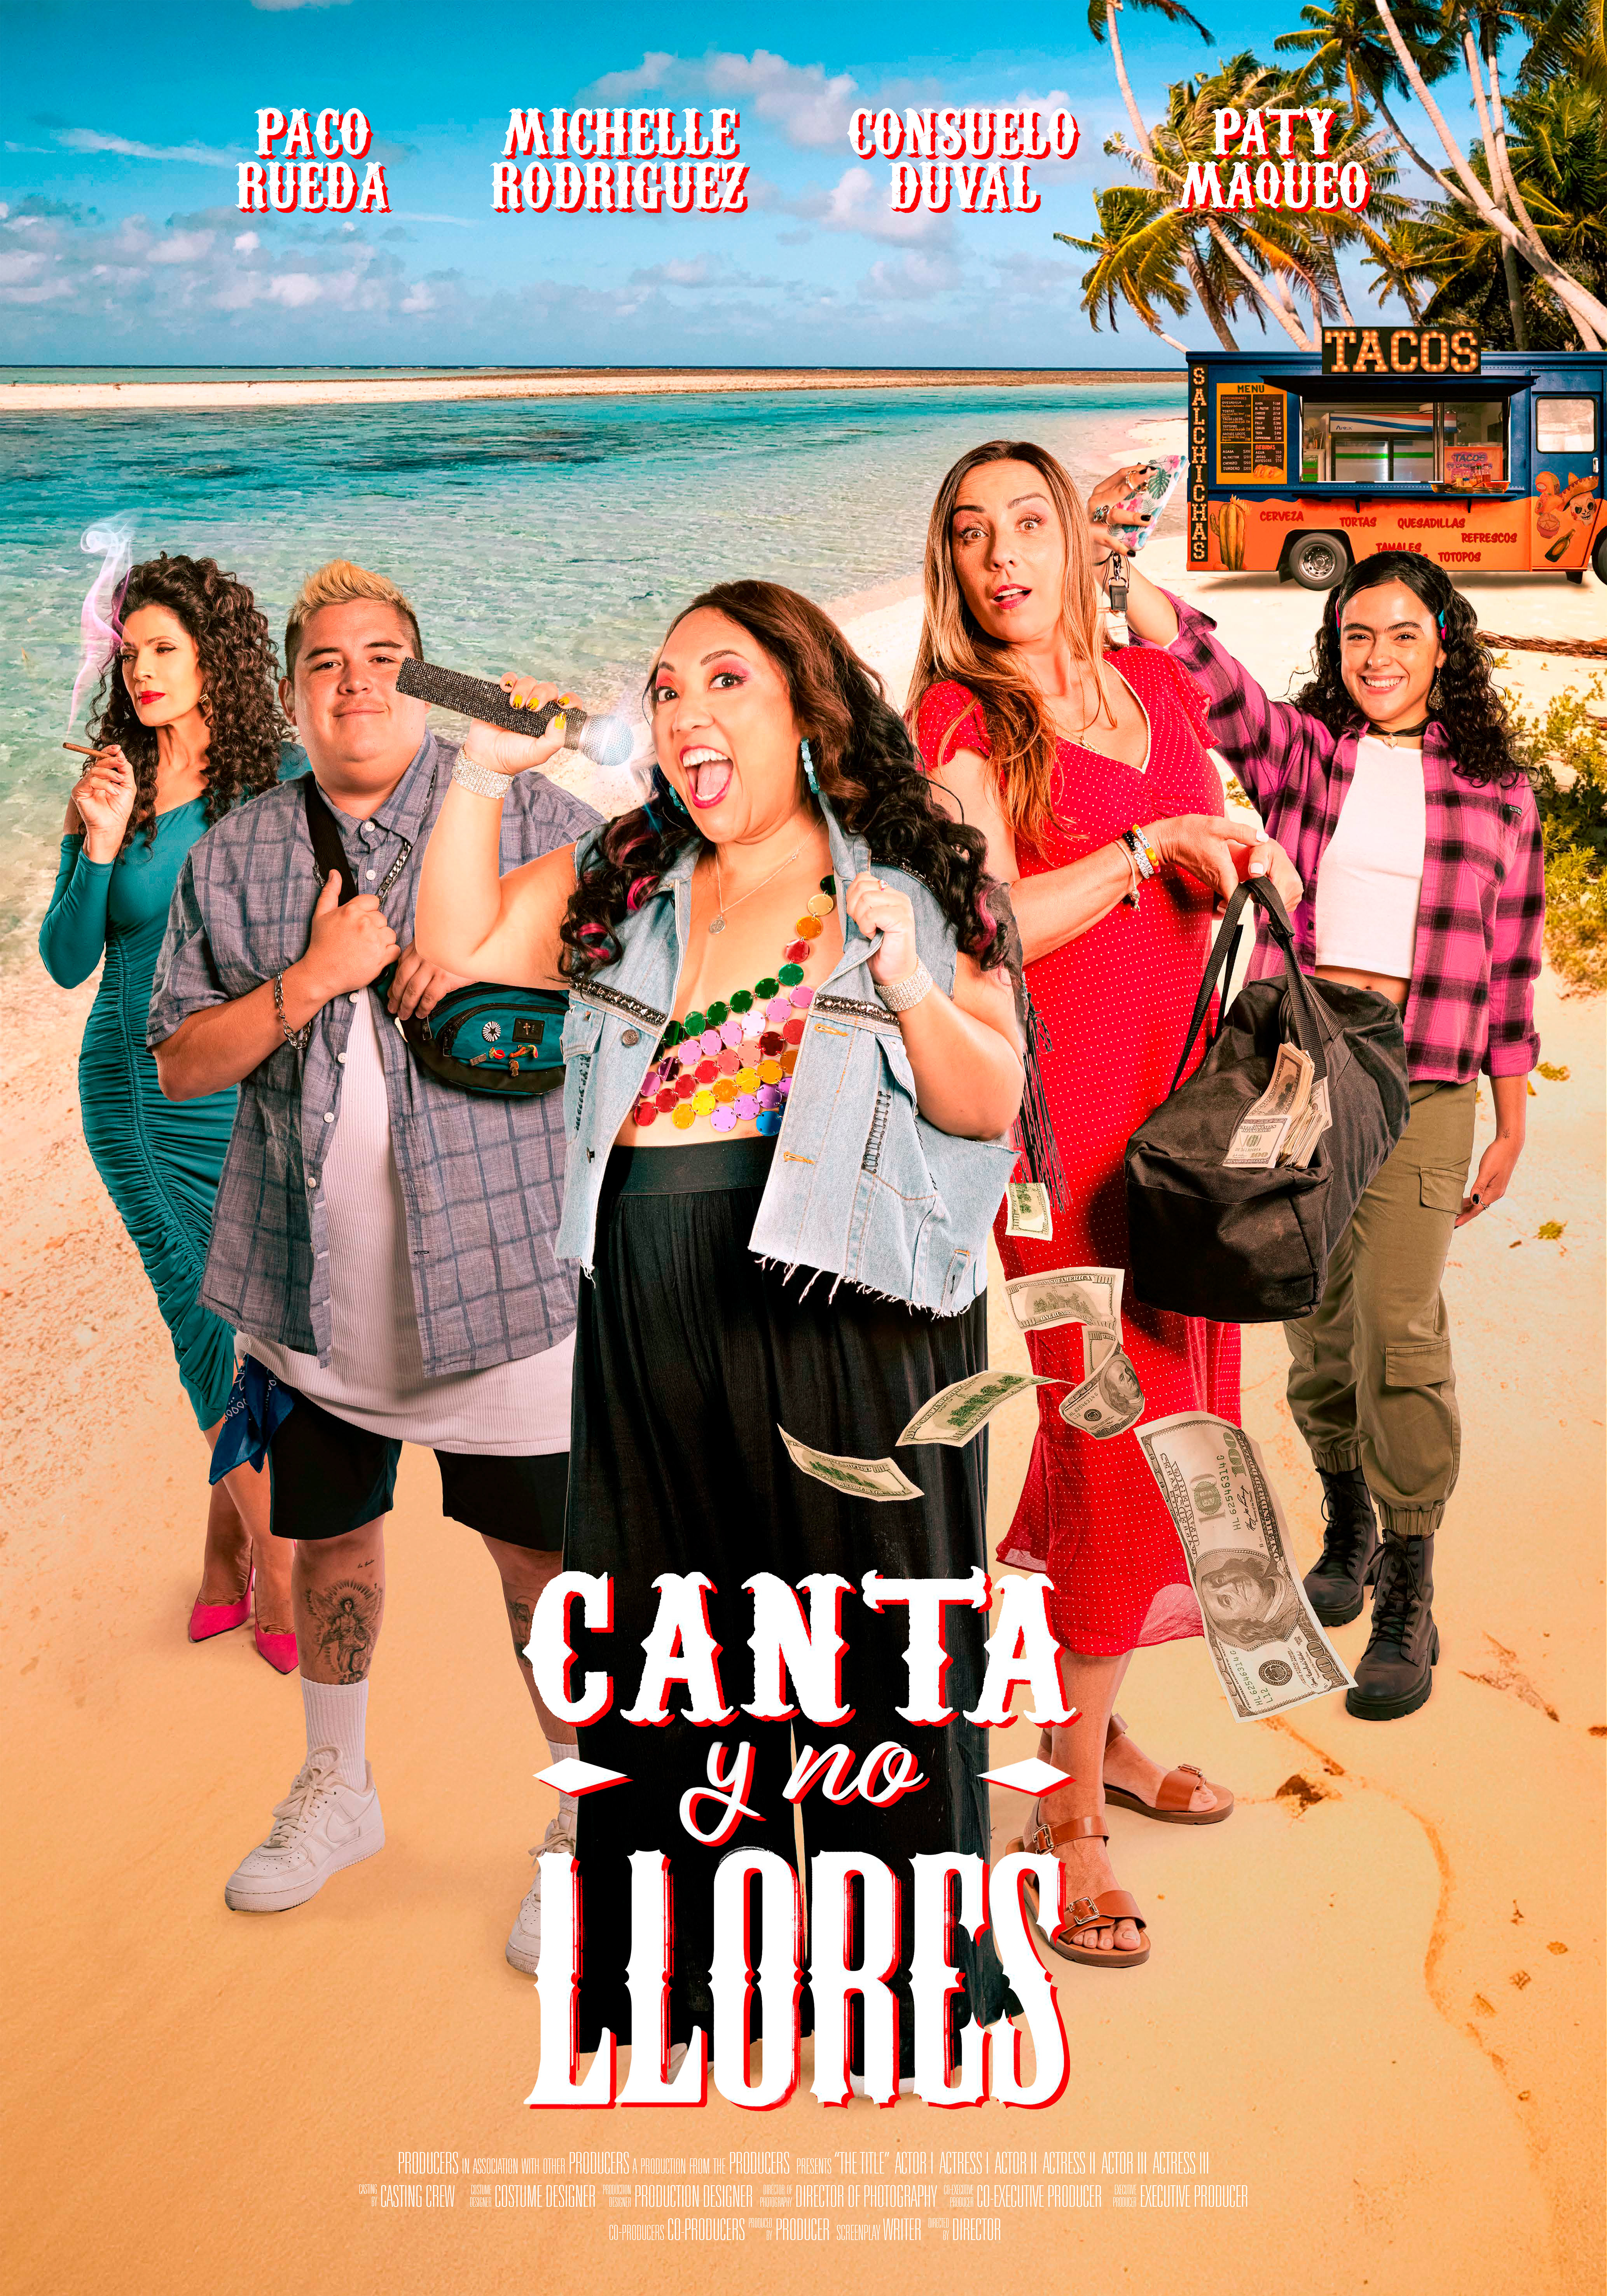 Poster from the movie 'Canta y no llores'